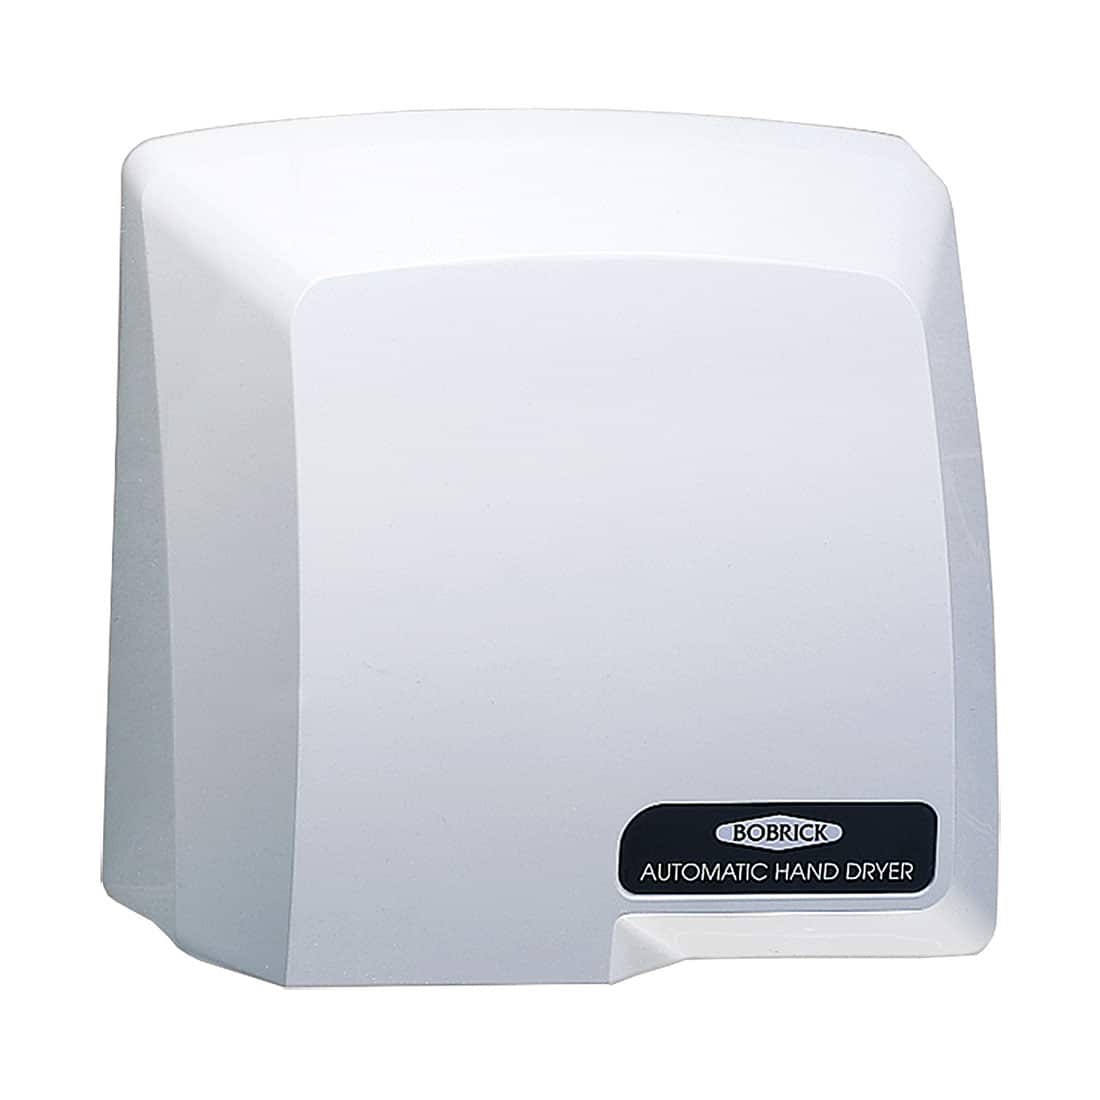 Sliver Modundry Wall Mounted Hand Dryer Easy to Install for Lavatory Bathroom.Low Noise 50dB,Intelligence Sensing System Hand Dryer Commercial,Powerful 1800W with Timing Progress Light 